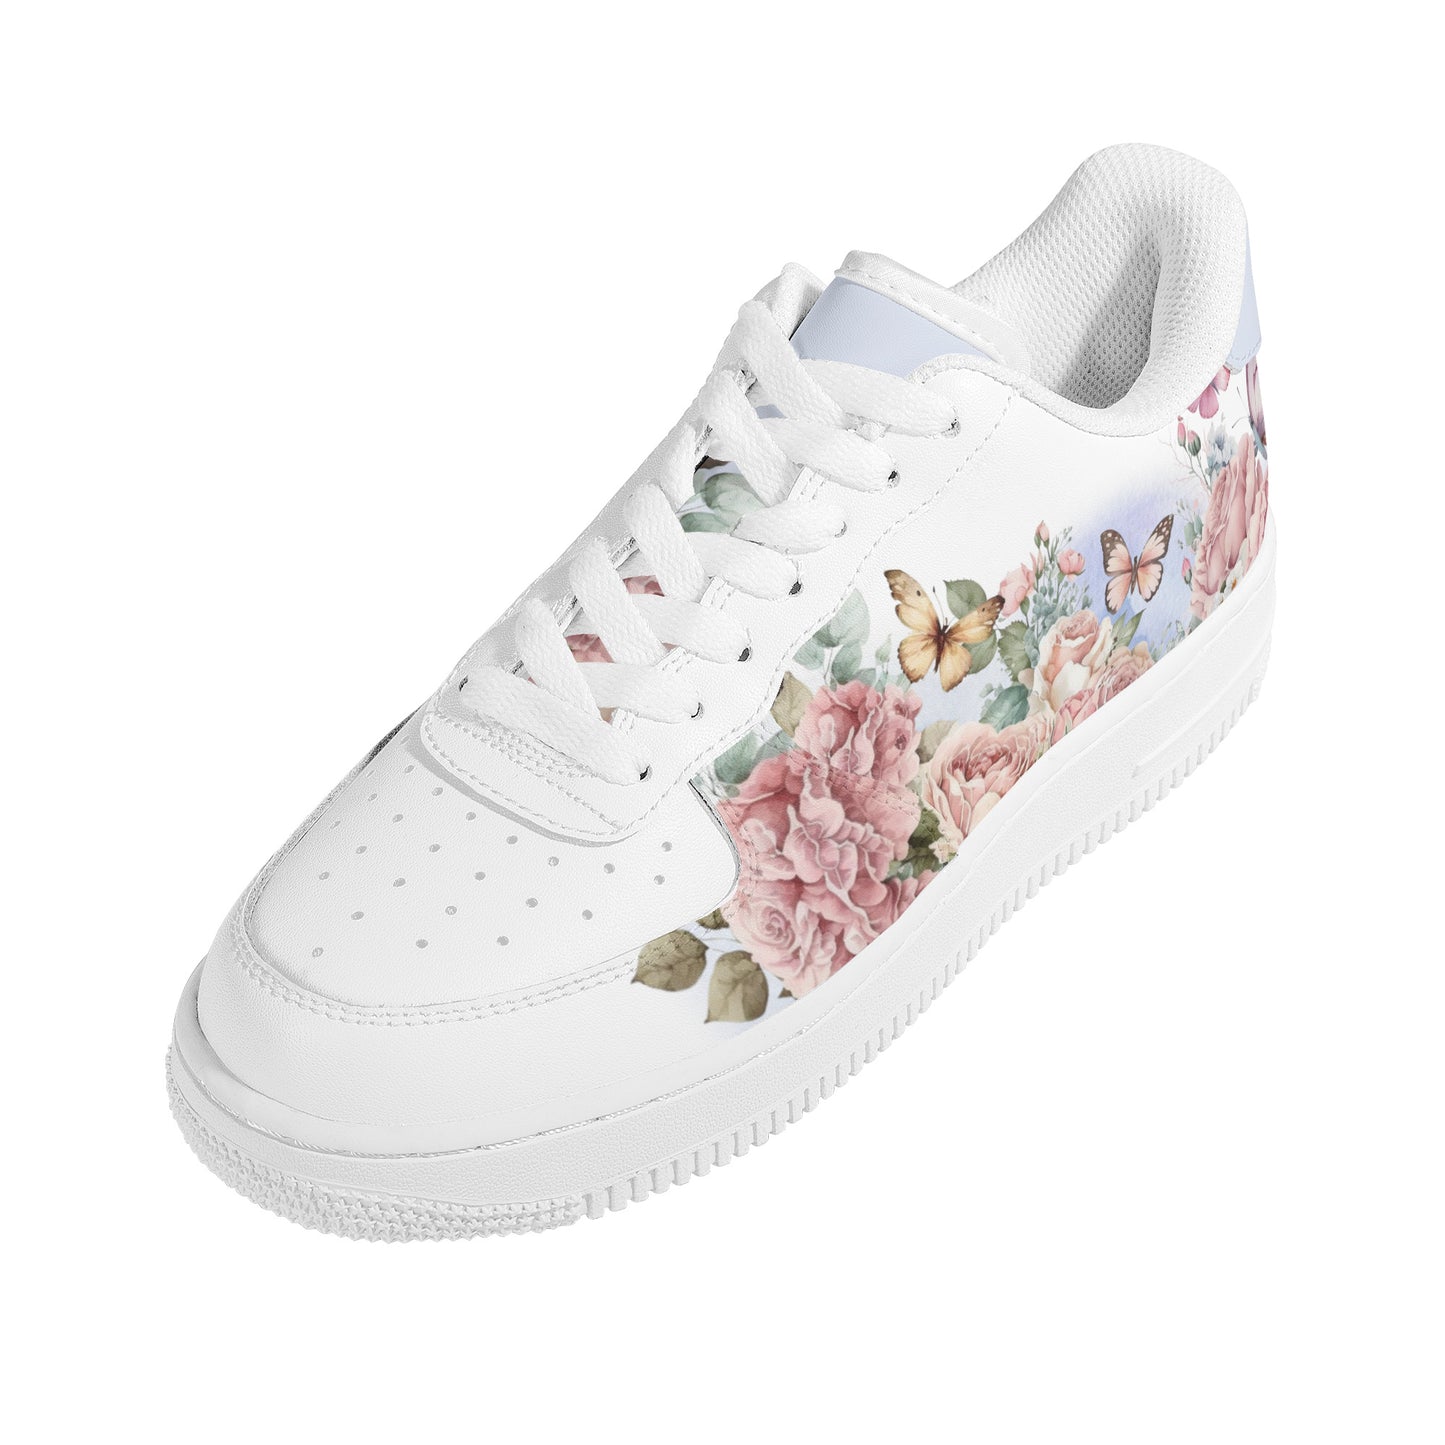 Floral & Butterlies Women's Sizes Low Top Leather Shoes